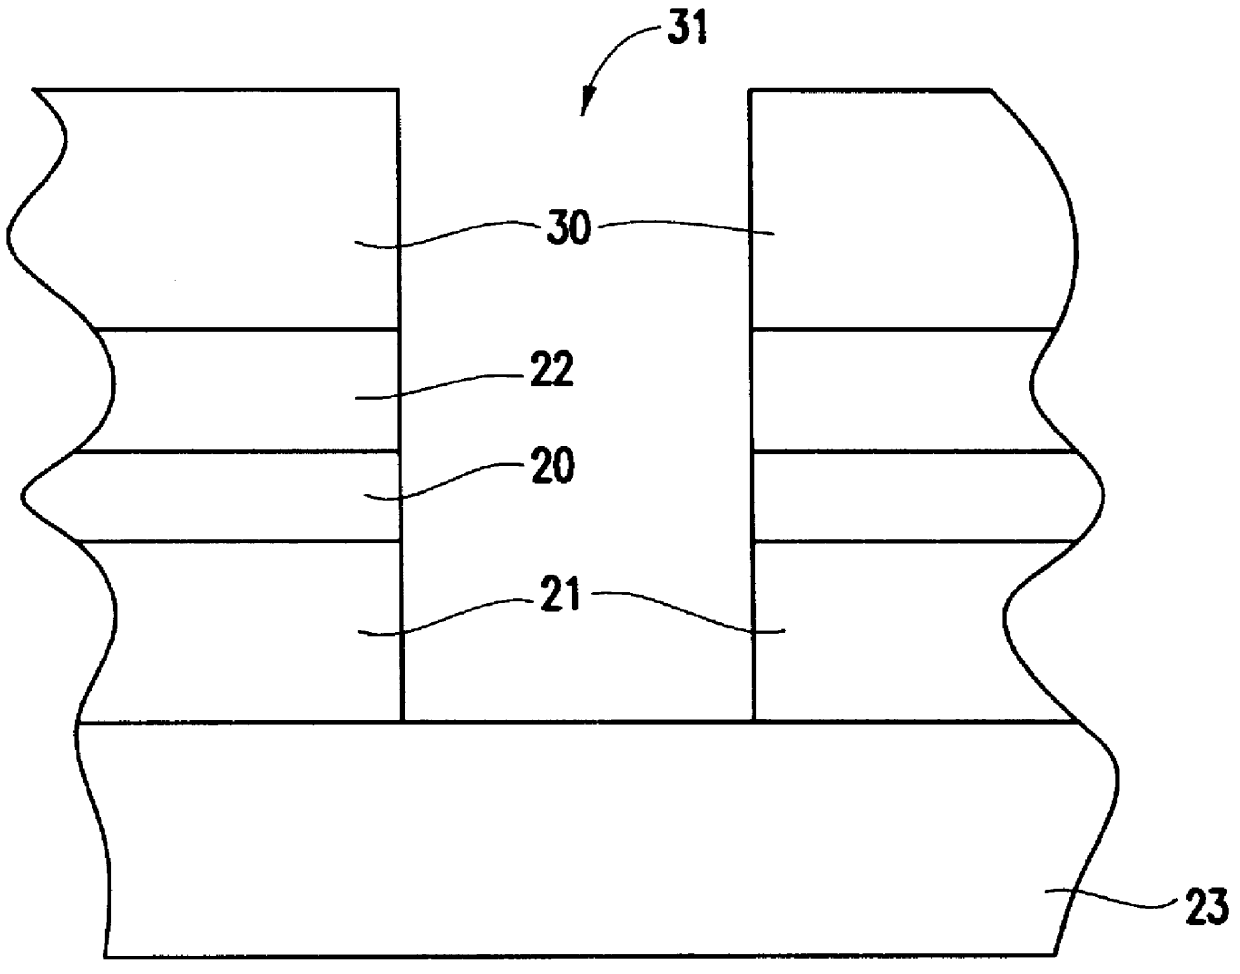 Shallow trench isolation method utilizing combination of spacer and fill